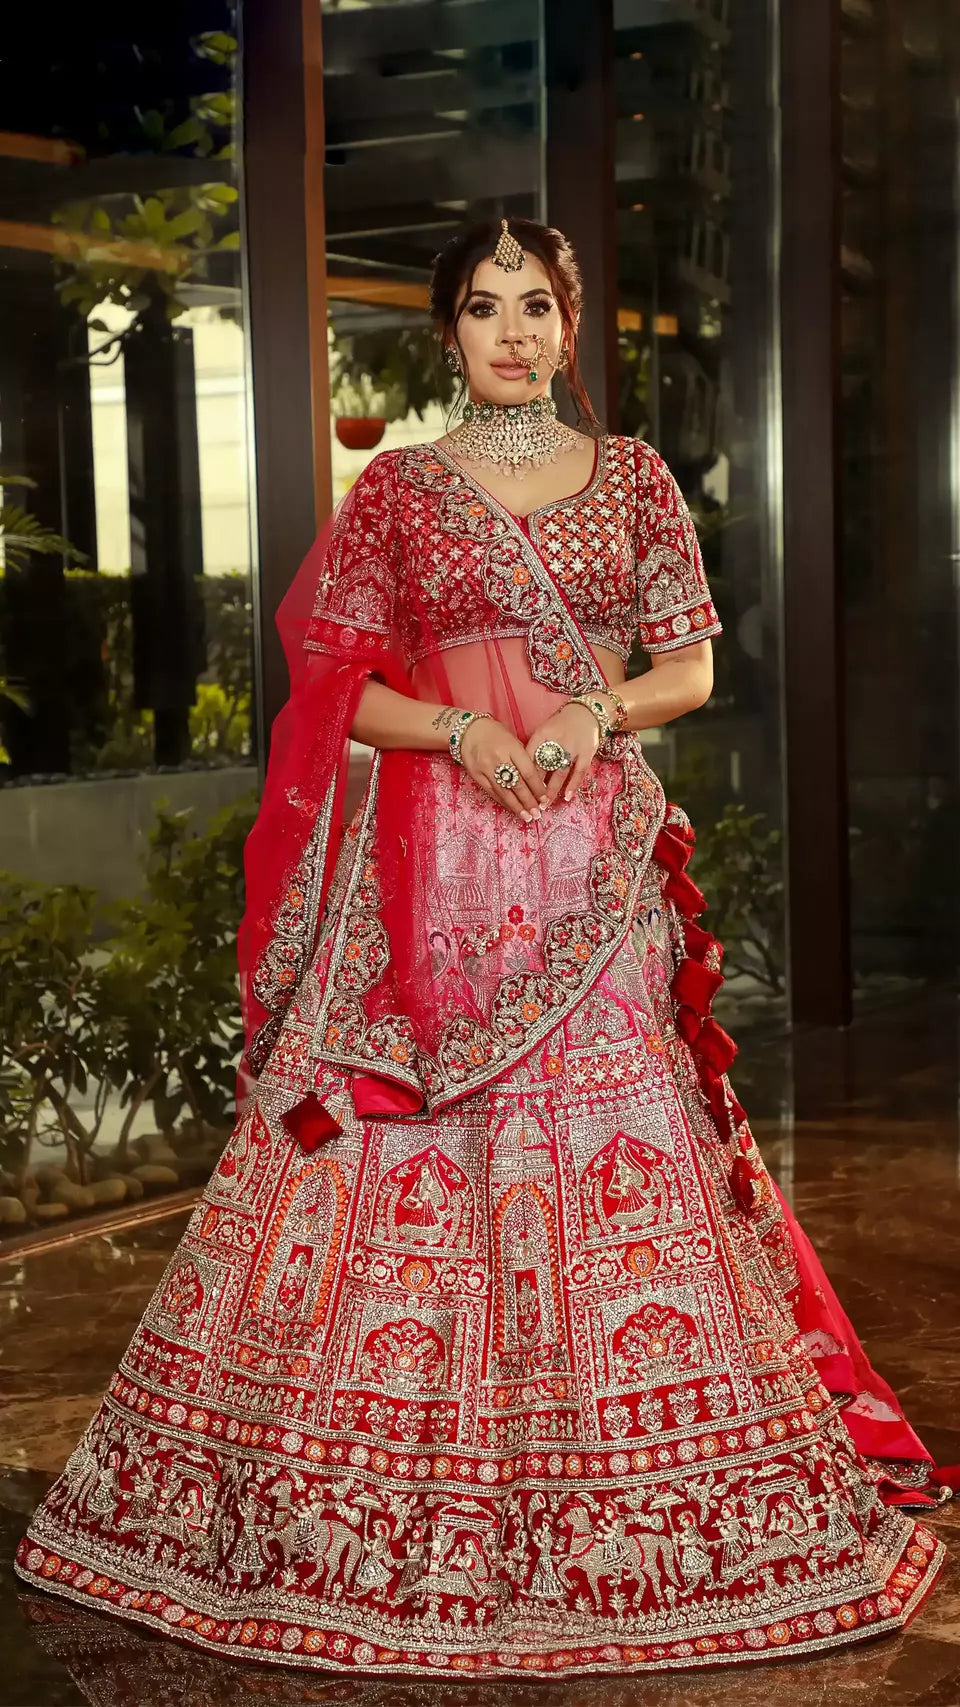 How to Choose the Perfect Color and Fabric for Your Wedding Lehenga